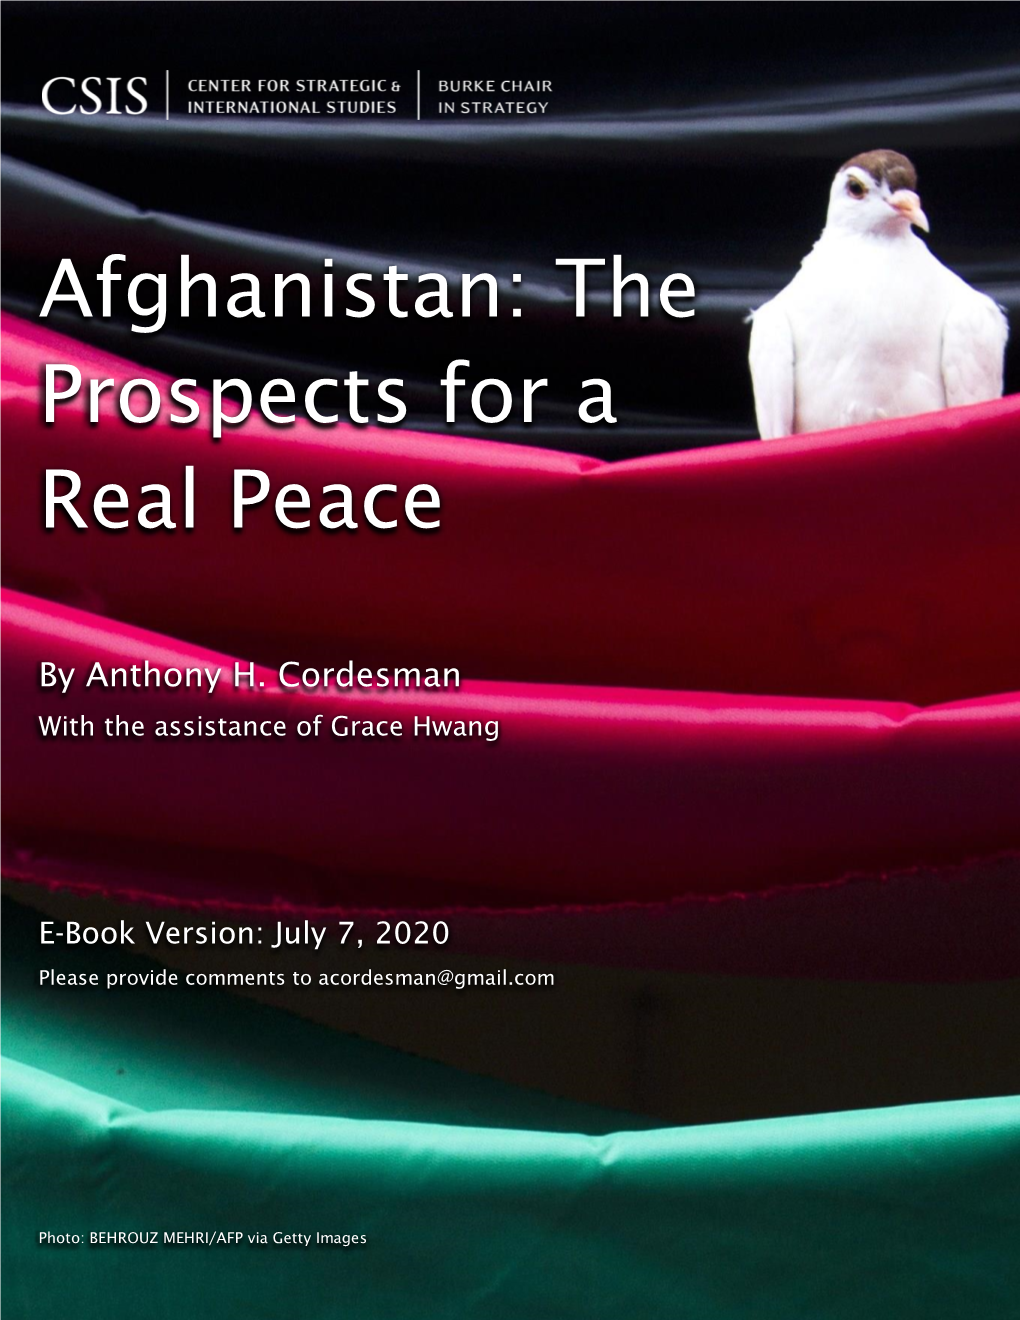 Afghanistan: the Prospects for a Real Peace